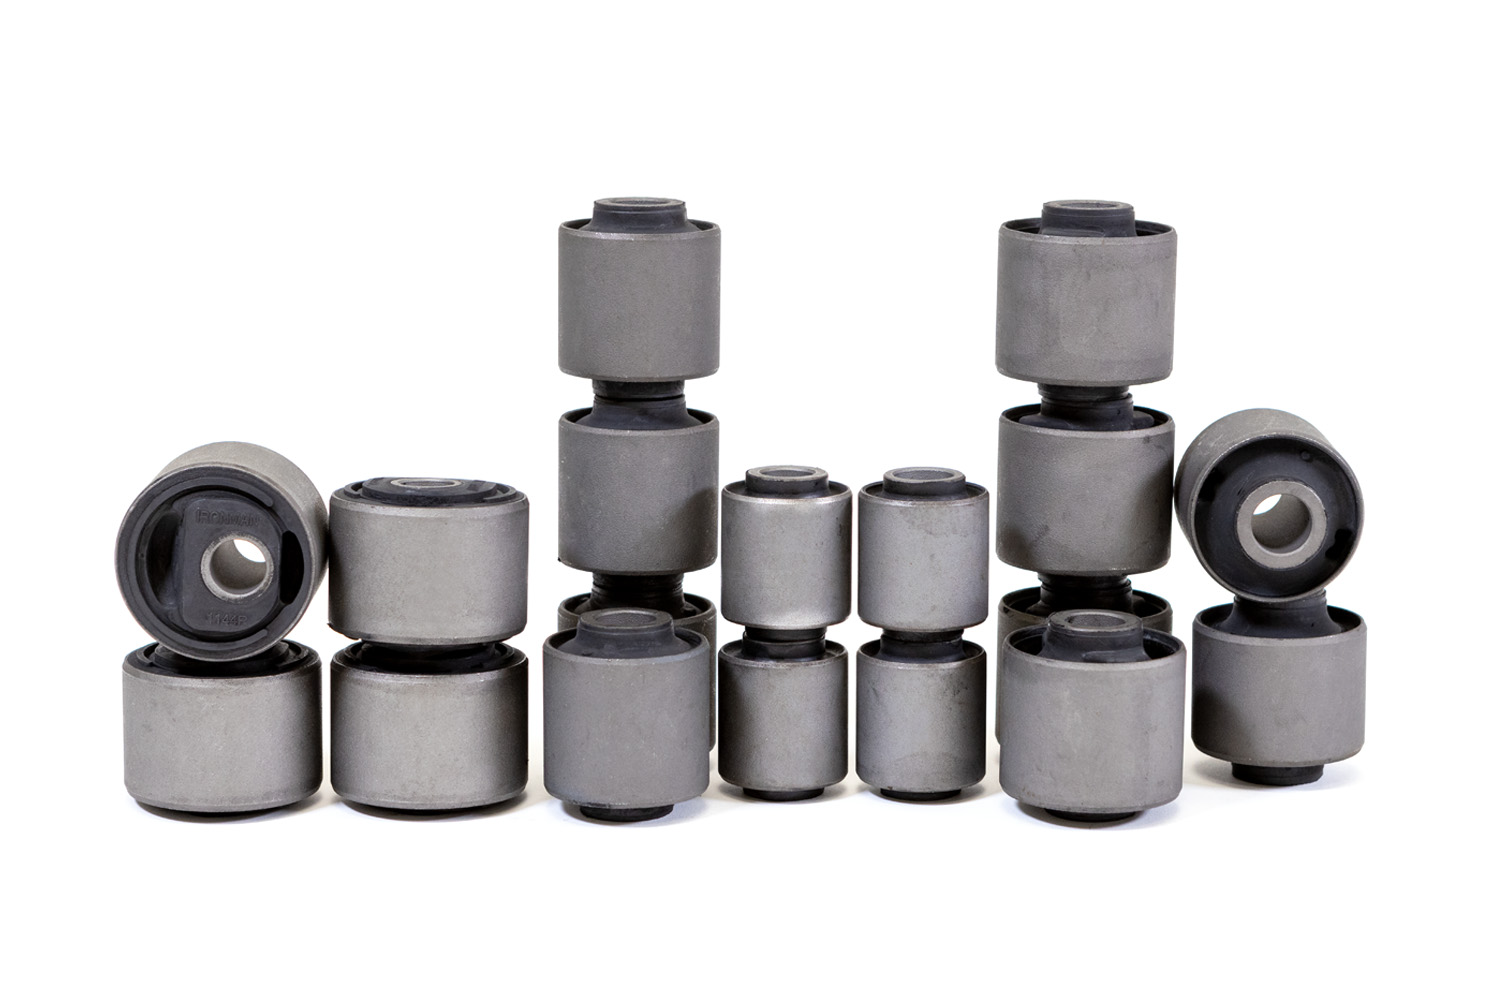 Suspension Arm Bushing Kit With Offset Radius Arm Bushings Suited For Toyota 80 Series Land Cruiser Questions & Answers